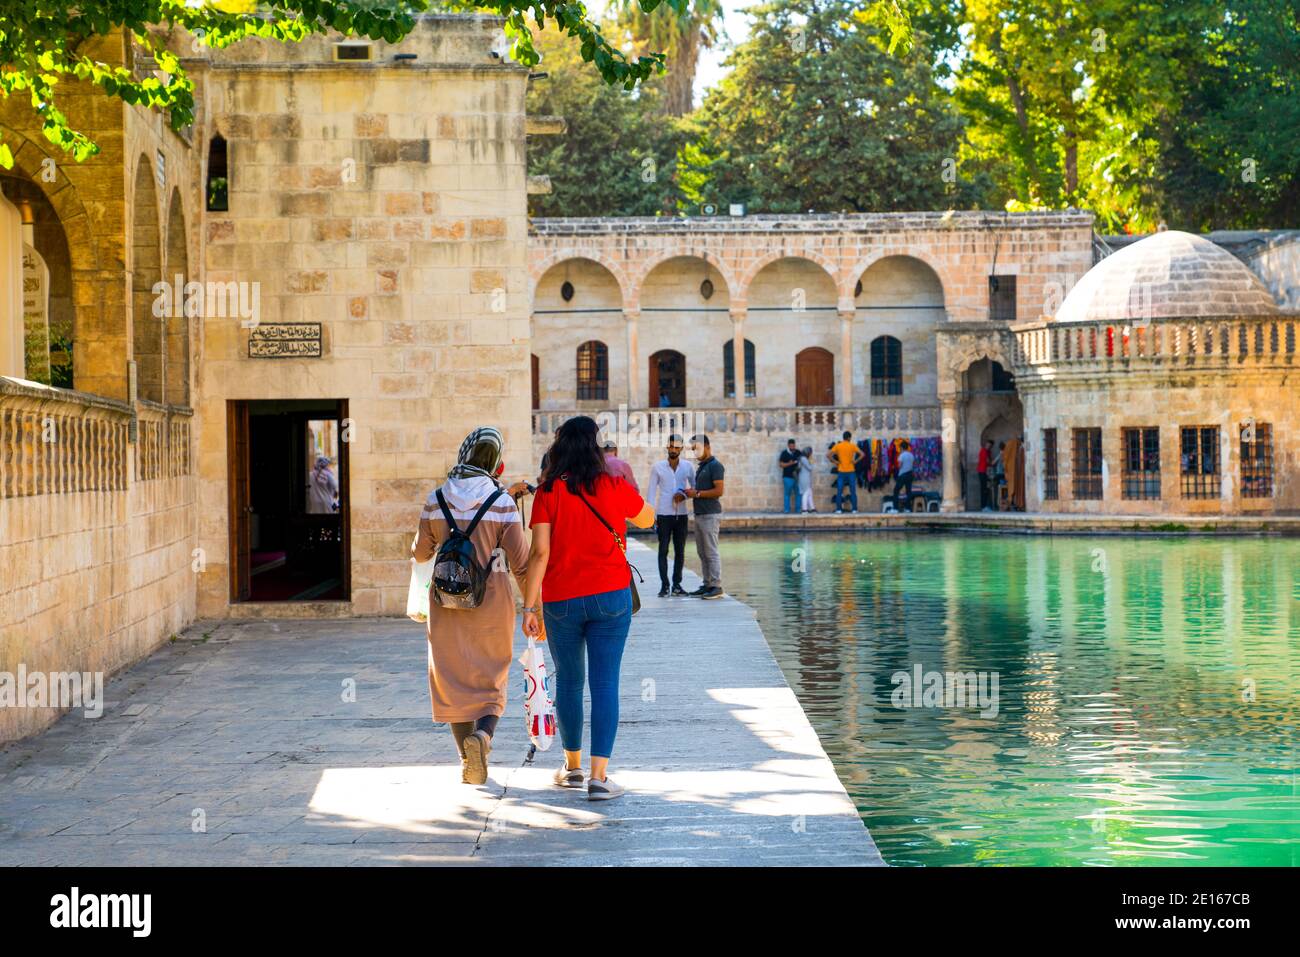 Sanli Urfa, Turkey: September 12 2020: Rear view of two female tourists near Pool of Abraham (Balikli Gol) and historic buildings in background Stock Photo